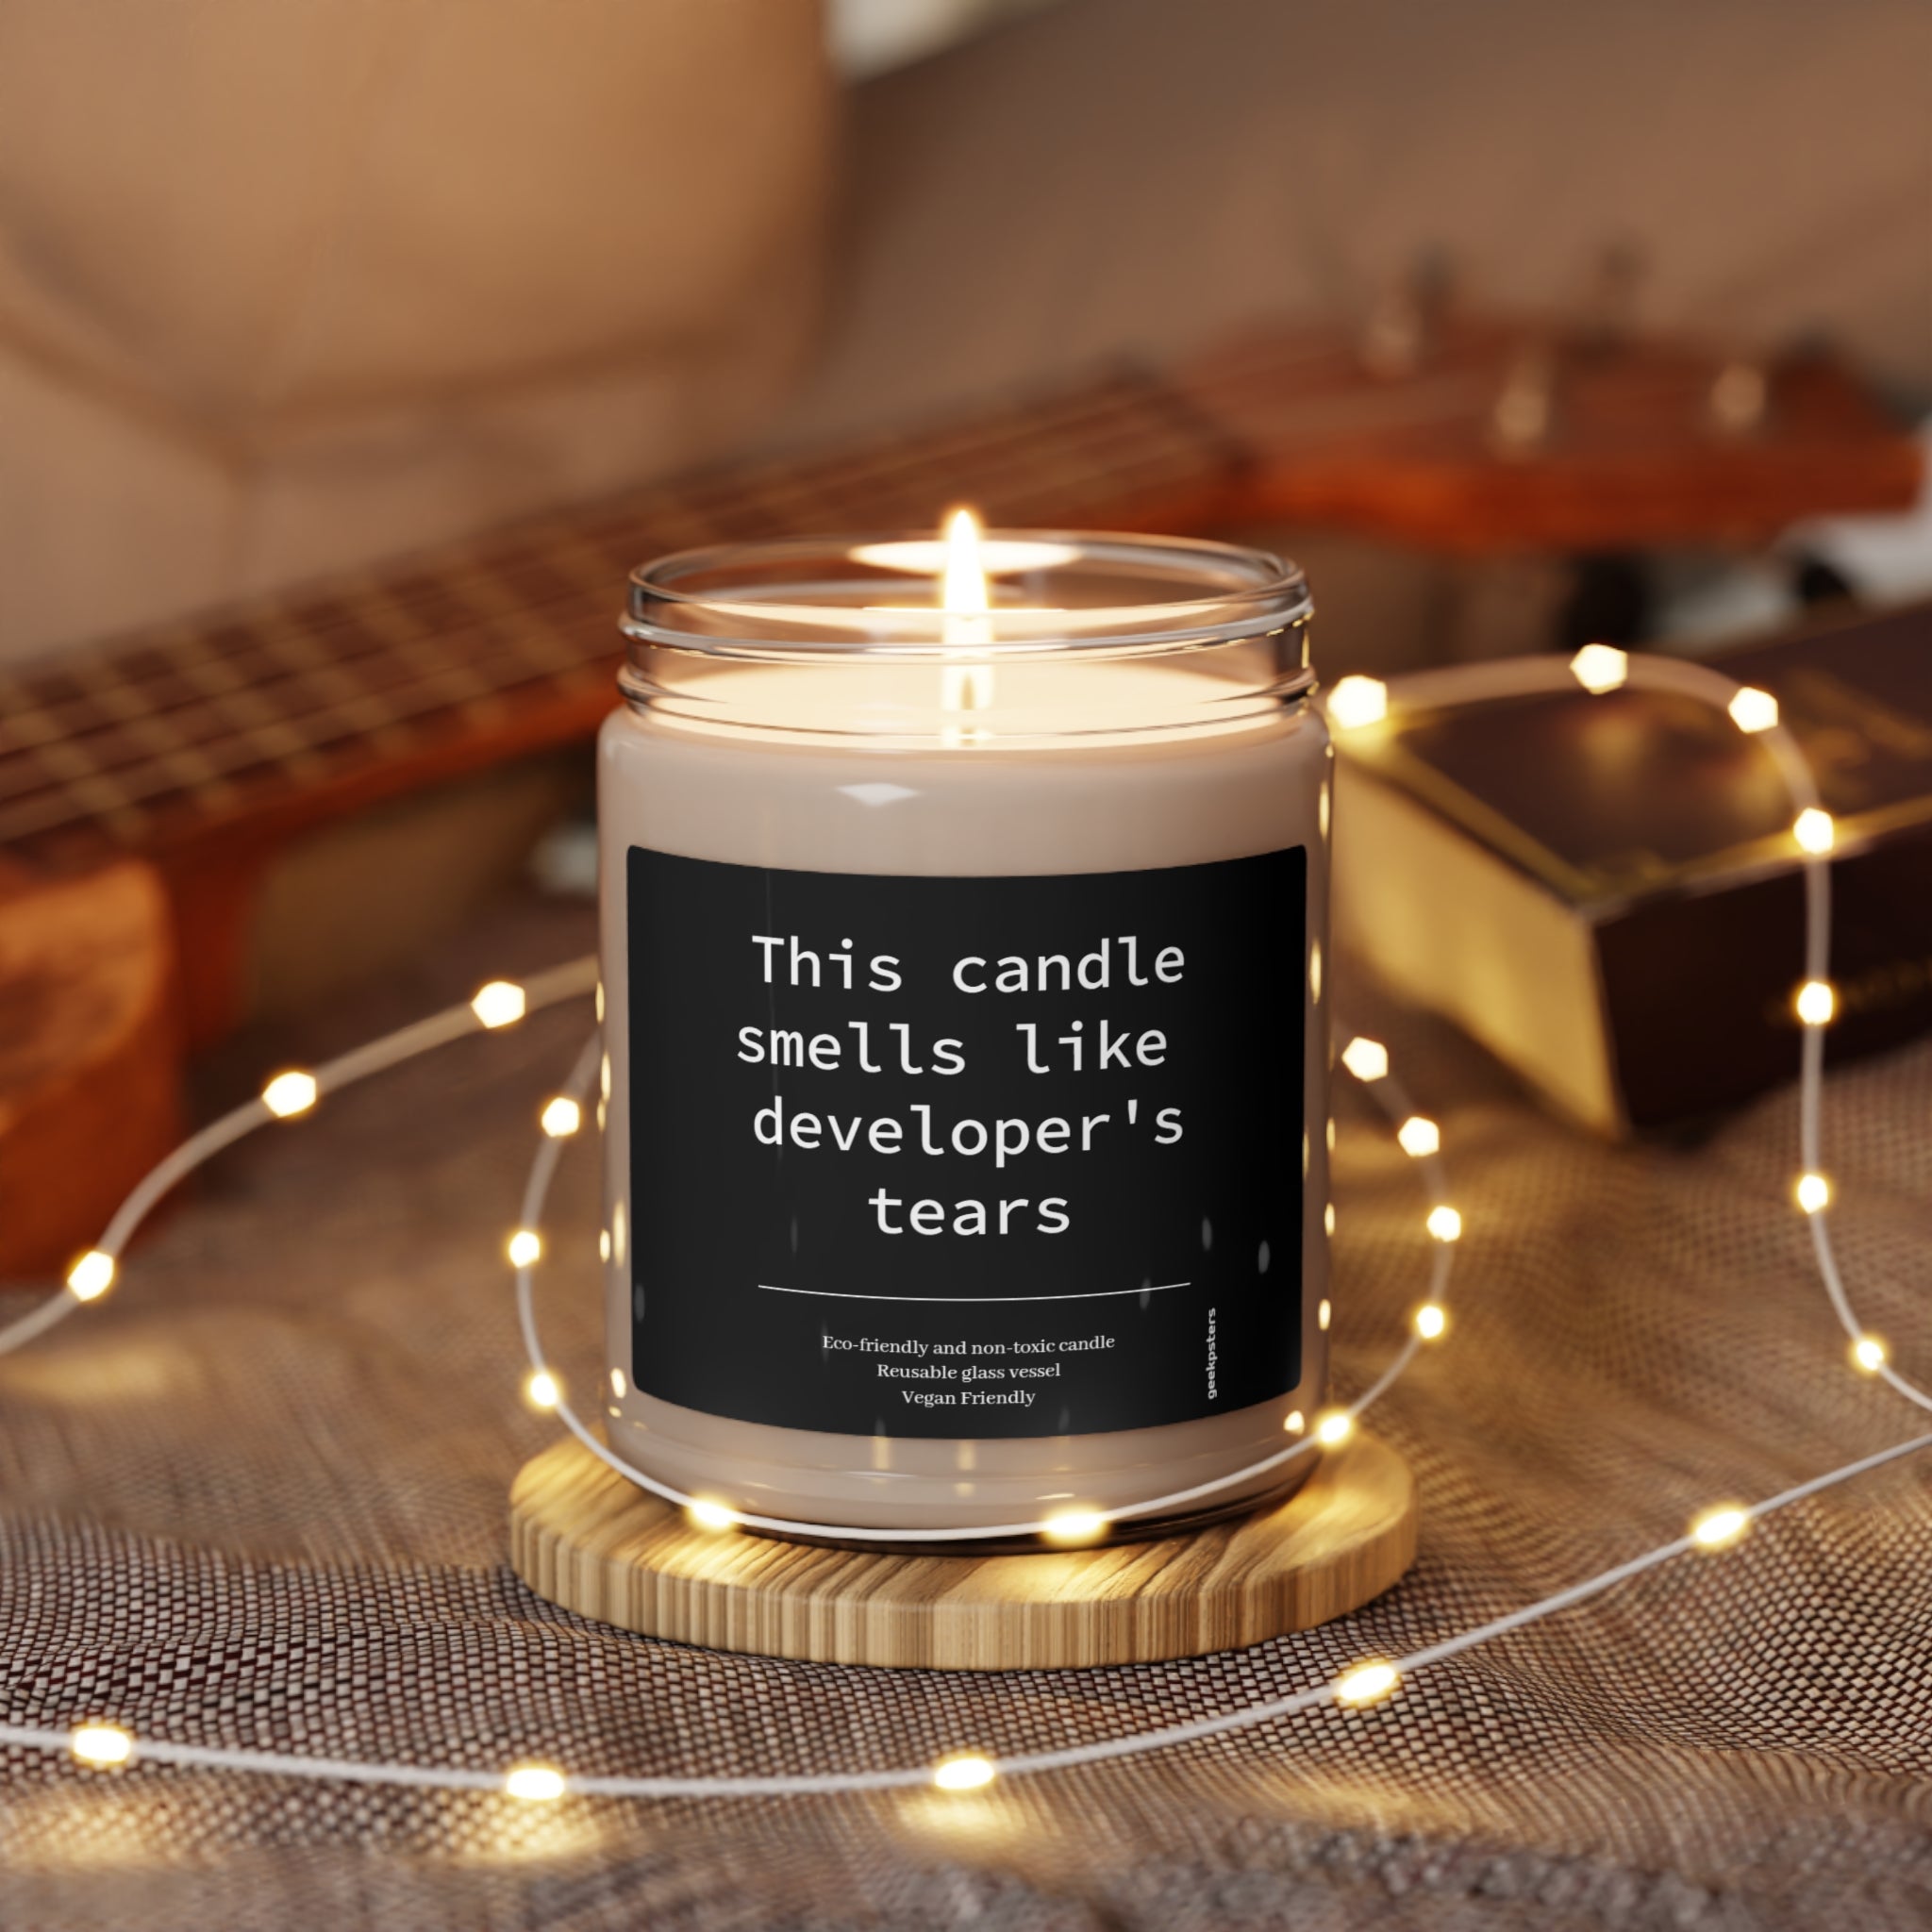 A This Candle Smells Like Developer's Tears scented candle, made from a natural soy wax blend, with humorous labeling placed on a wooden holder, surrounded by warm fairy lights.